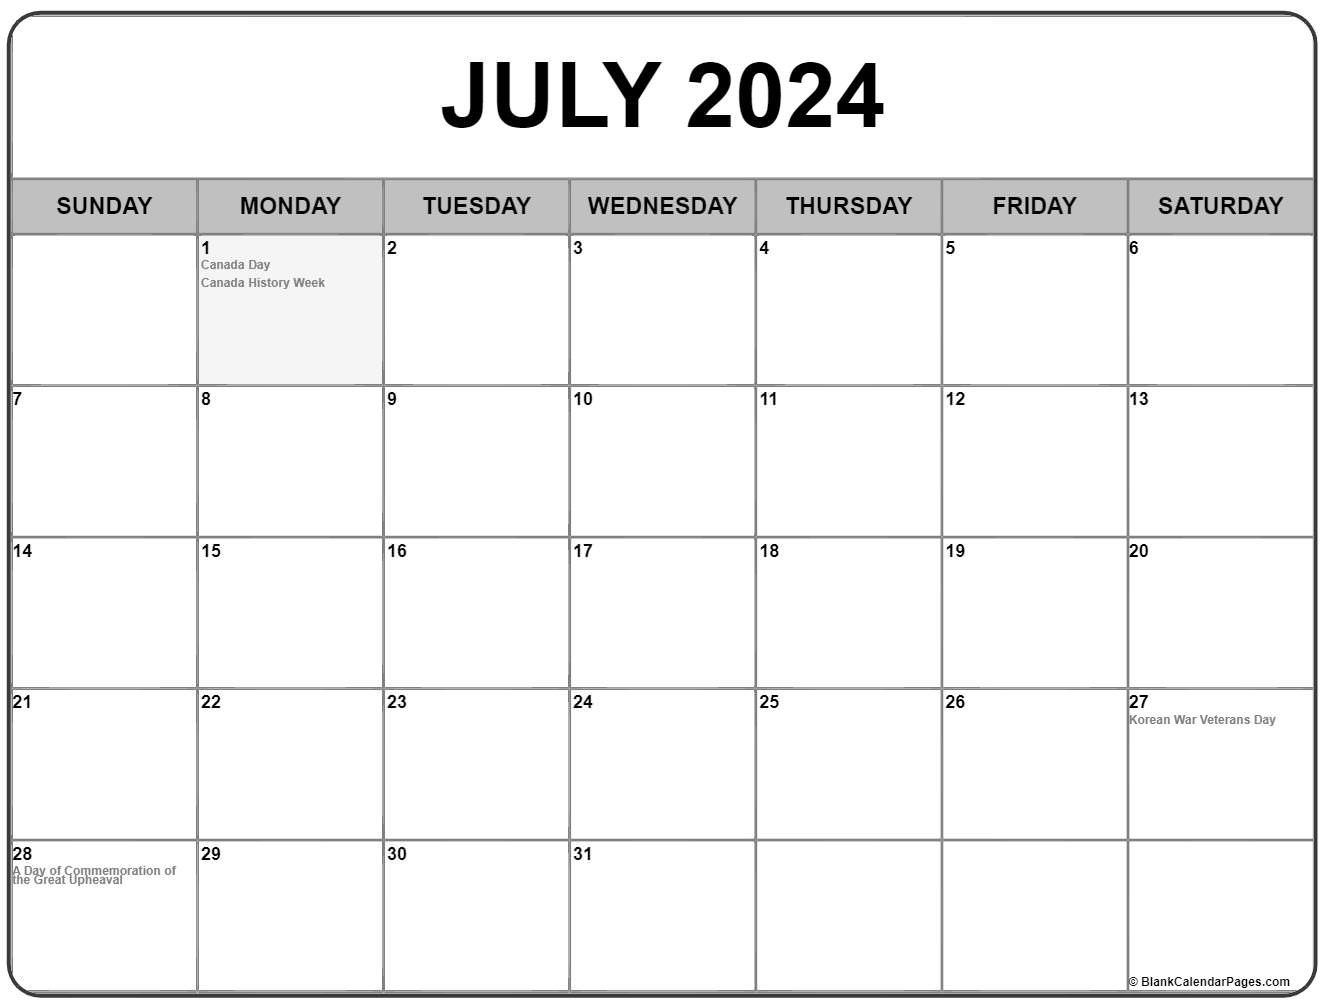 July 2022 calendar with holidays